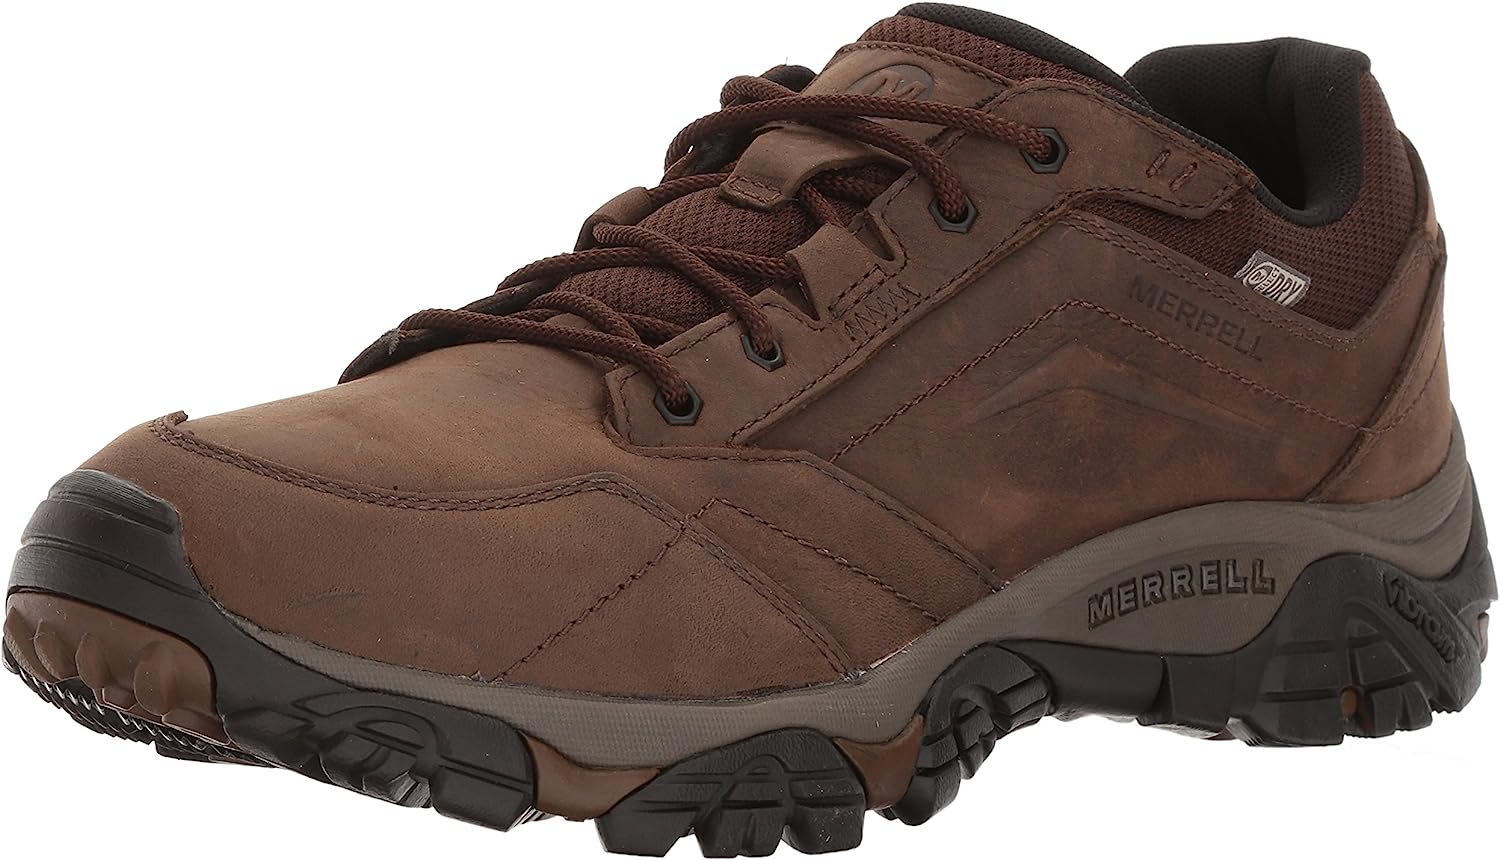 Product image of Merrell Men's Moab Adventure Lace Waterproof Hiking Shoe